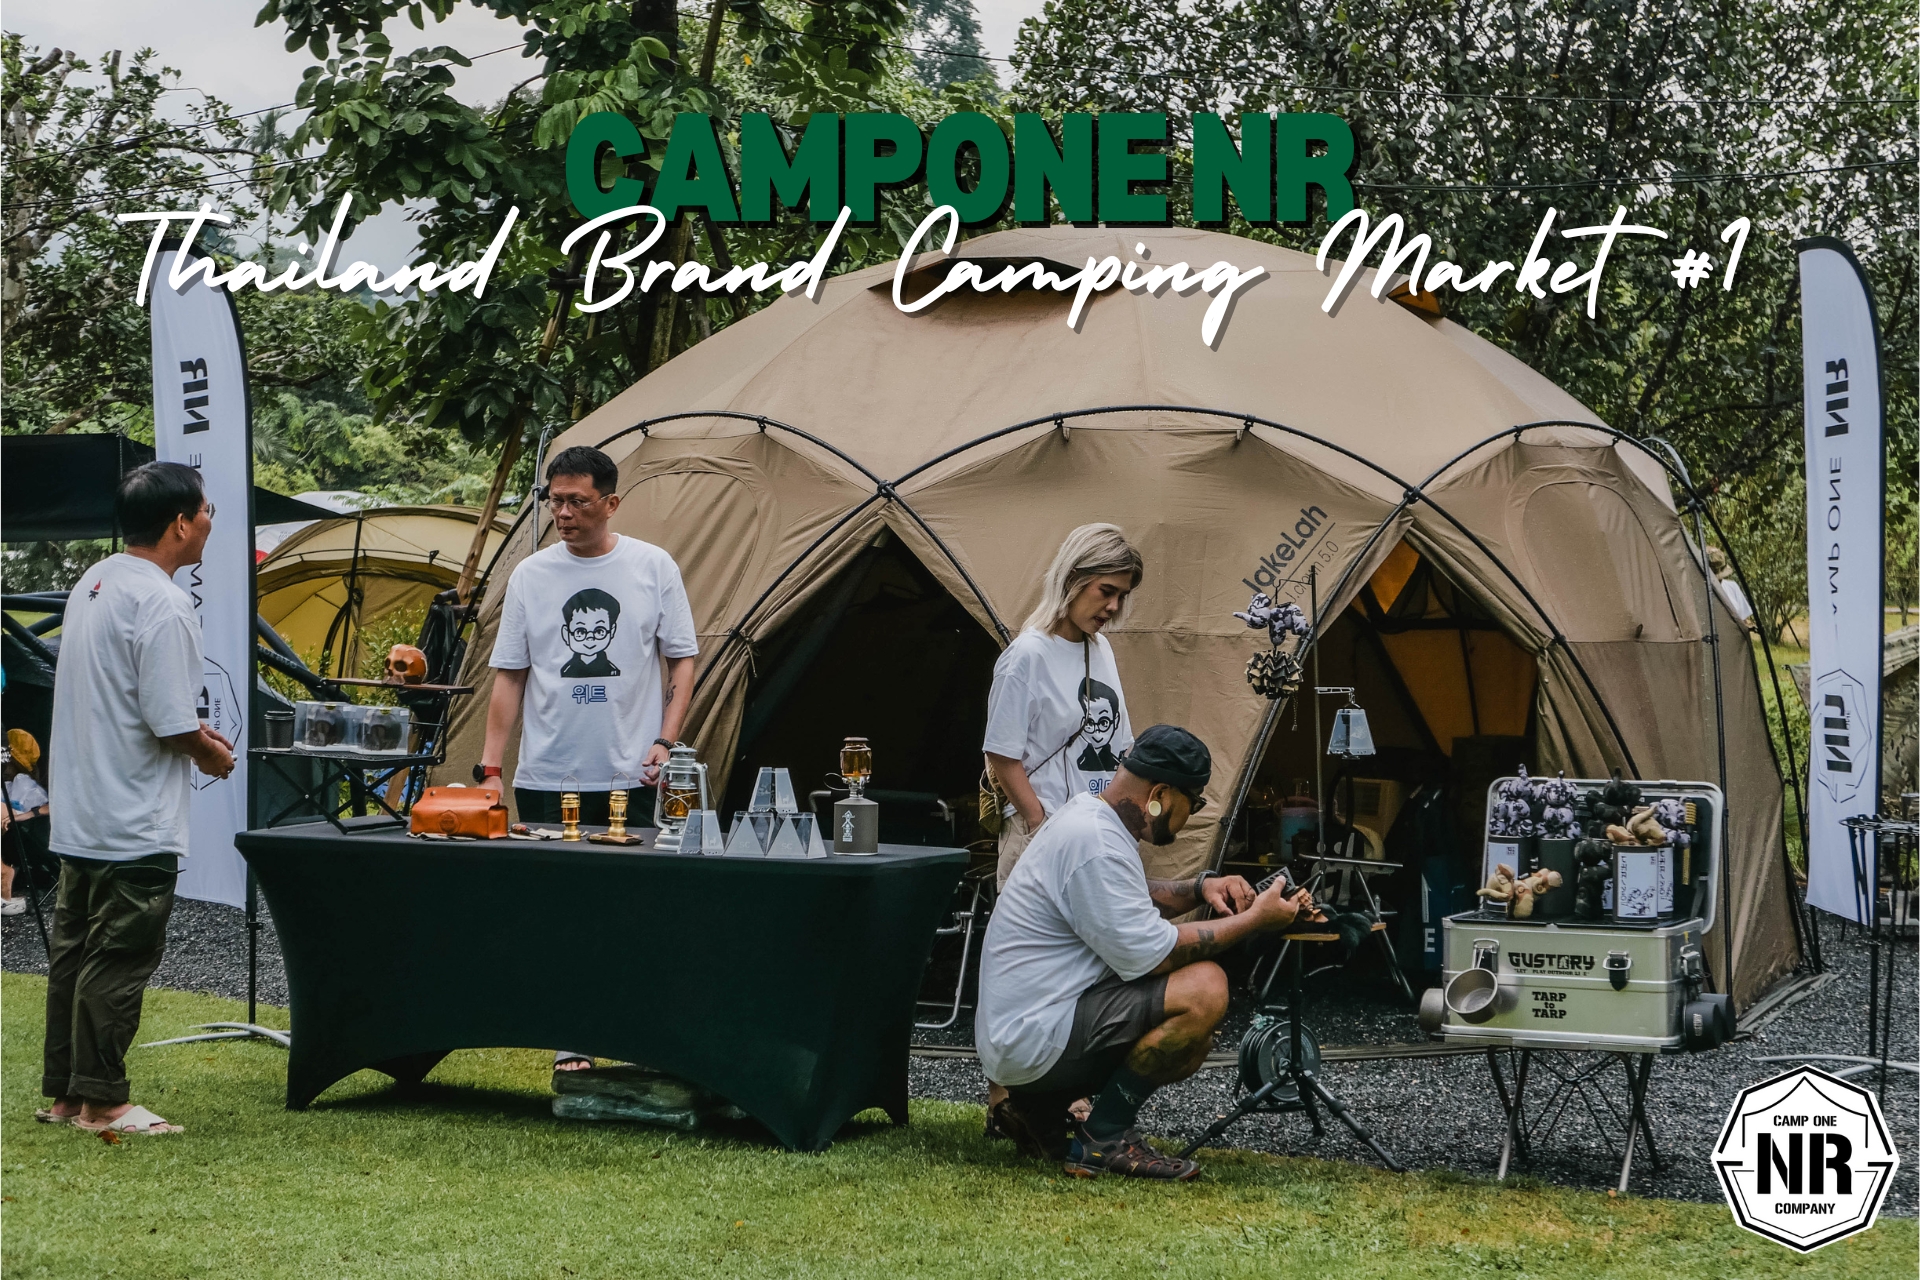 Campone NR Thailand Brand Camping Market #1